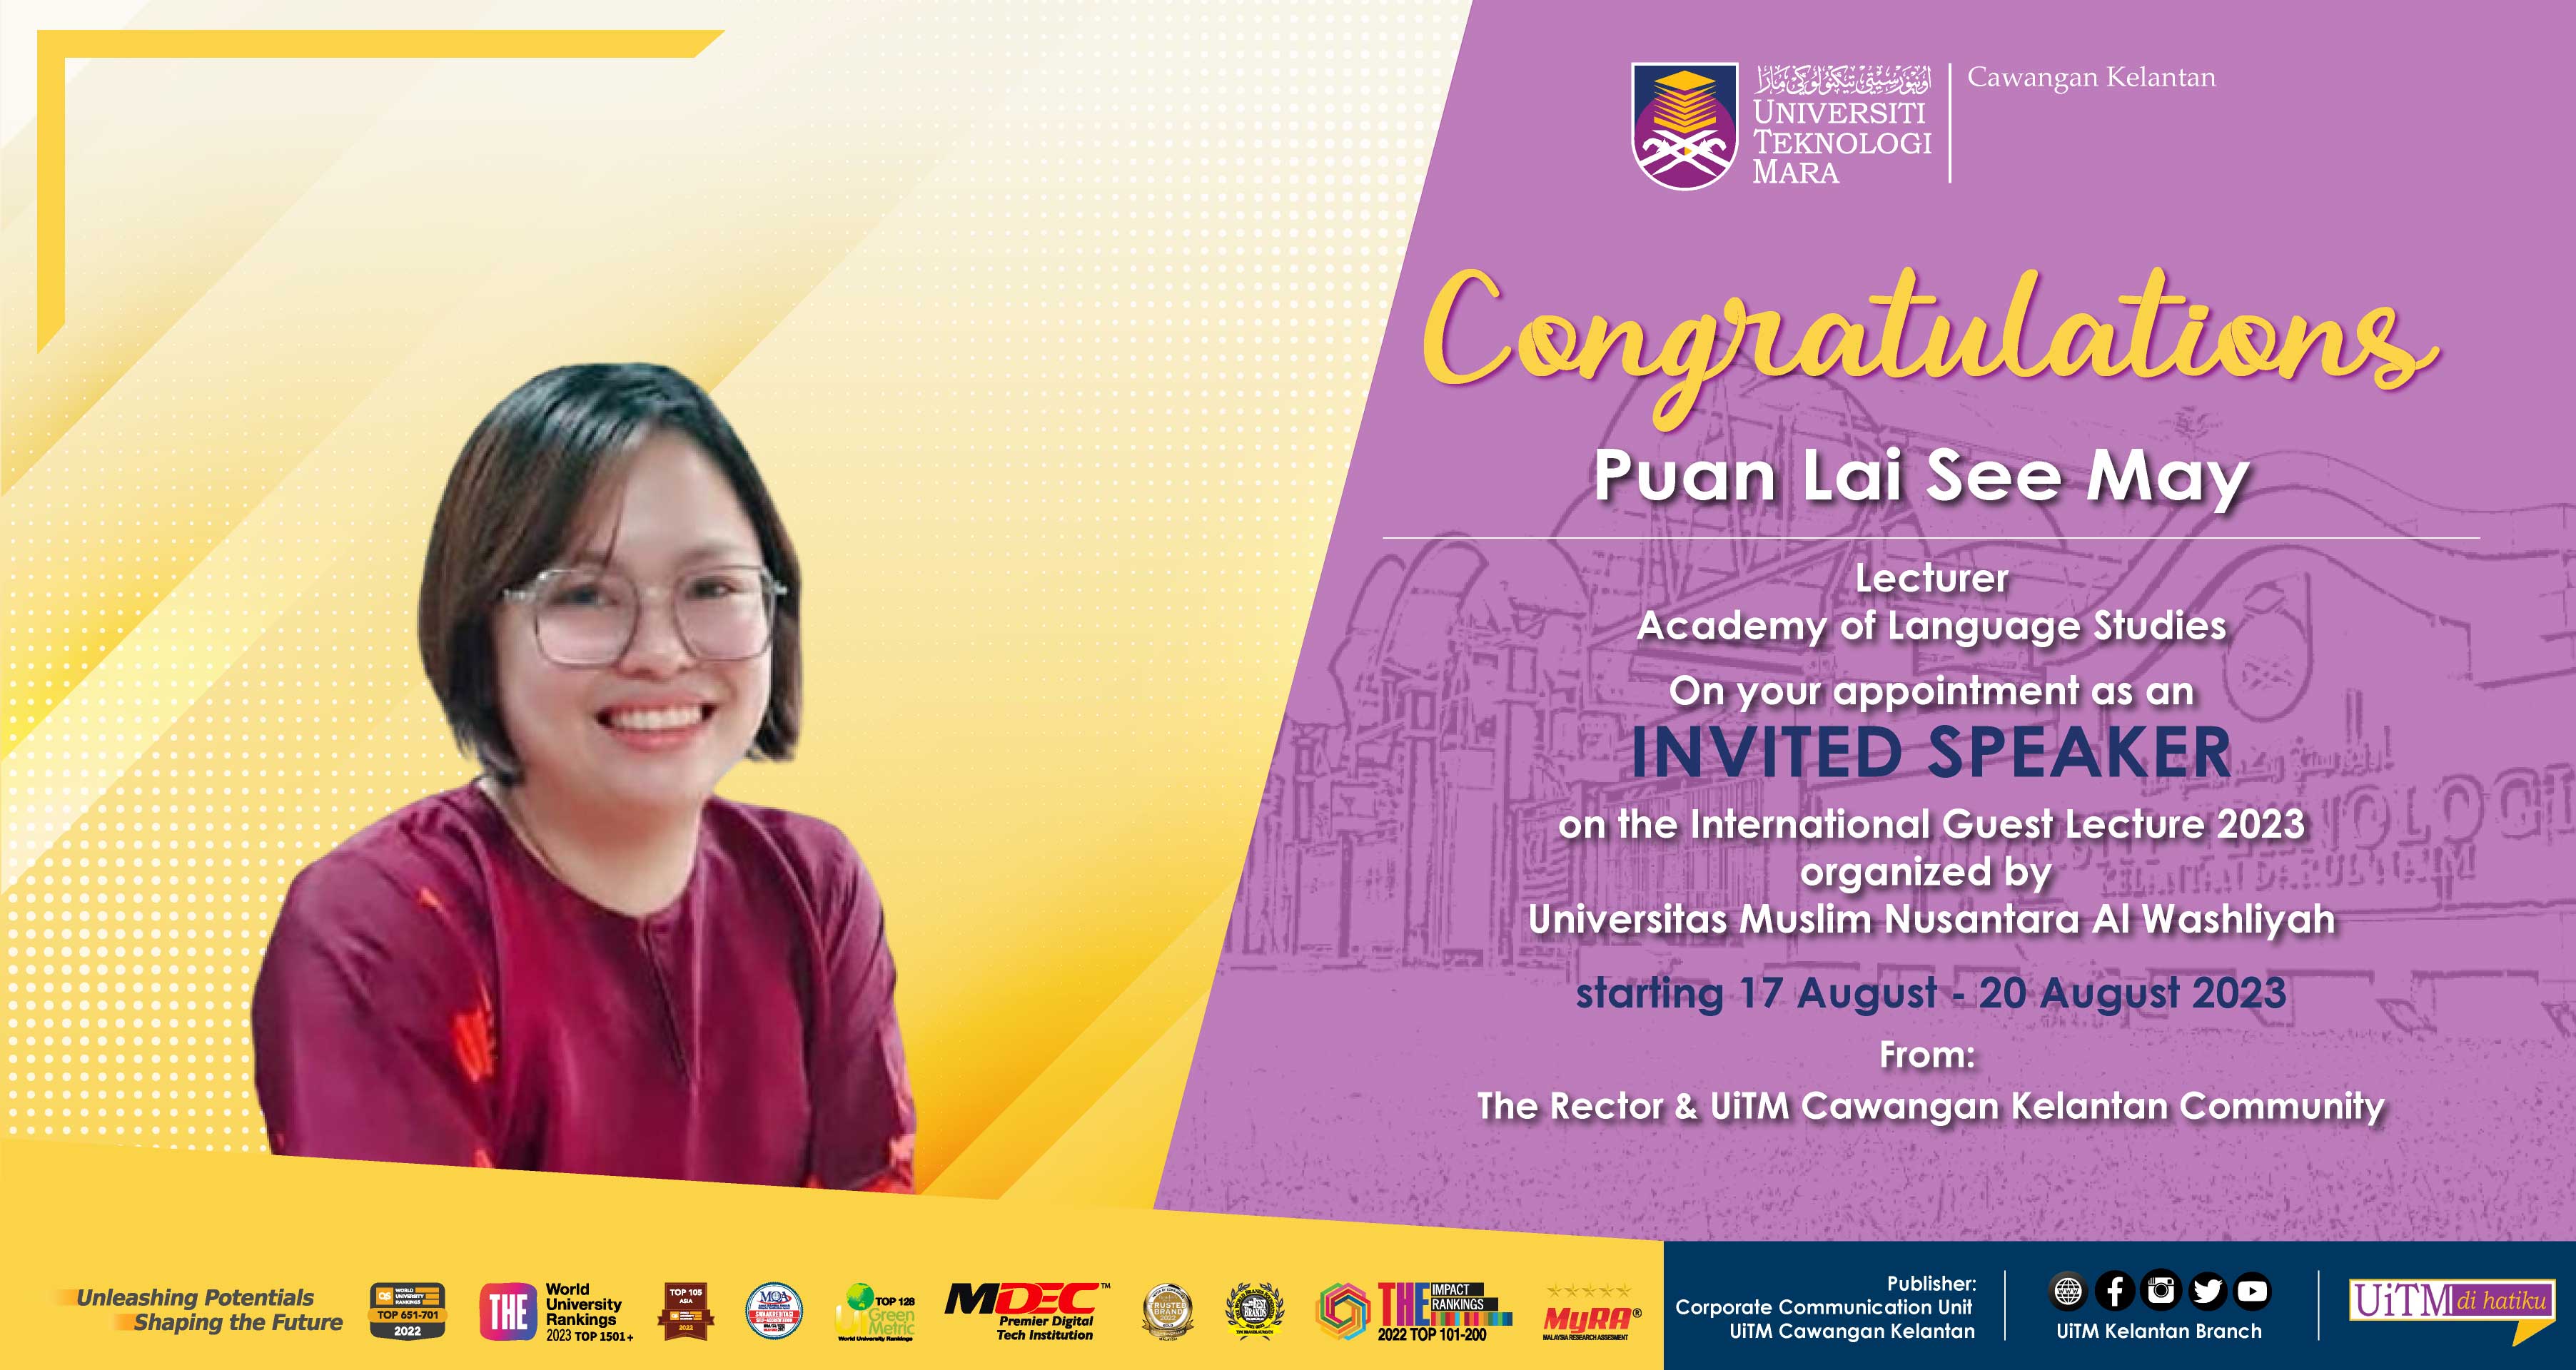 Congratulations!!! Puan Lai See May, Invited Speaker on the International Guest Lecture 2023